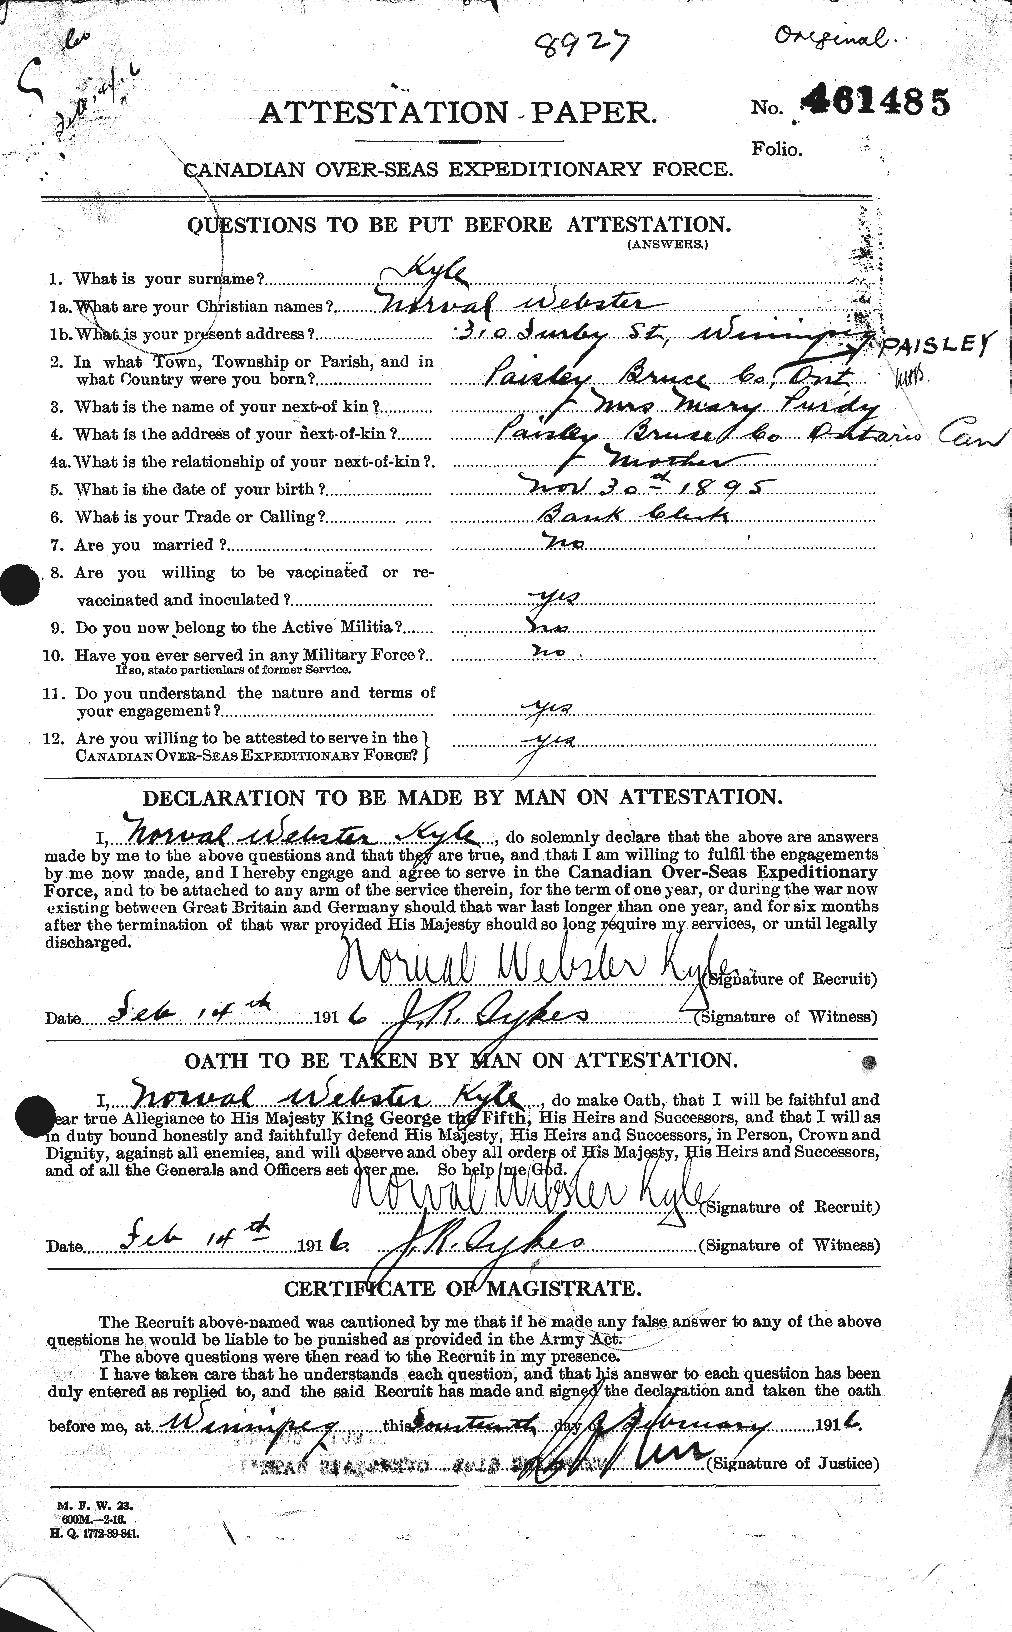 Personnel Records of the First World War - CEF 443734a